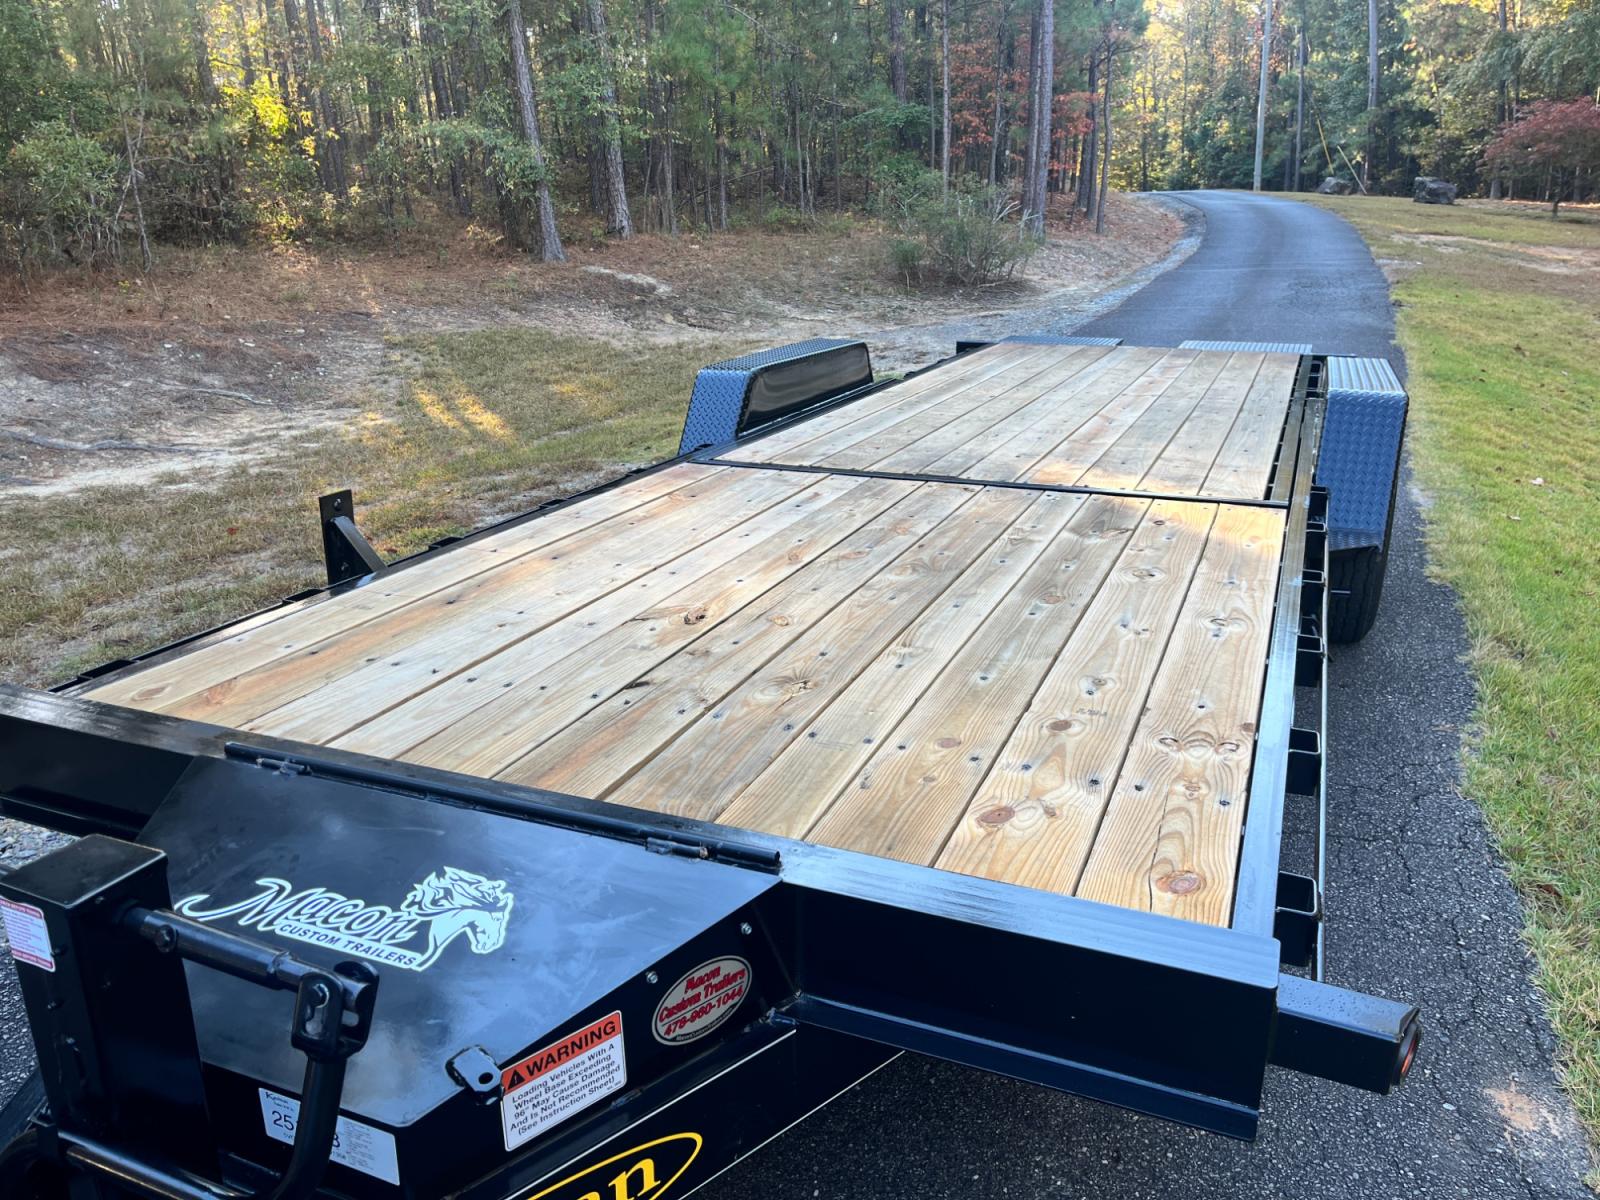 2023 Black Kaufman Trailers 7ft X 22ft Tilt Bed , located at 1330 Rainey Rd., Macon, 31220, (478) 960-1044, 32.845638, -83.778687 - Brand New 2023 Model "Top of the Line" Kaufman Brand 7ft X 22ft Includes the 14ft Tilt Bed at Rear! 8ft Fixed Front Deck! 7 Ton Tilt Bed Flatbed BobCat & Equipment Trailer! Haul Your Truck, Tractor, BobCat, Mini-Excavator, UTV's, ATV's Etc. Tandem 7,000lb Dexter Axles, Electric Brakes on Both Ax - Photo #3